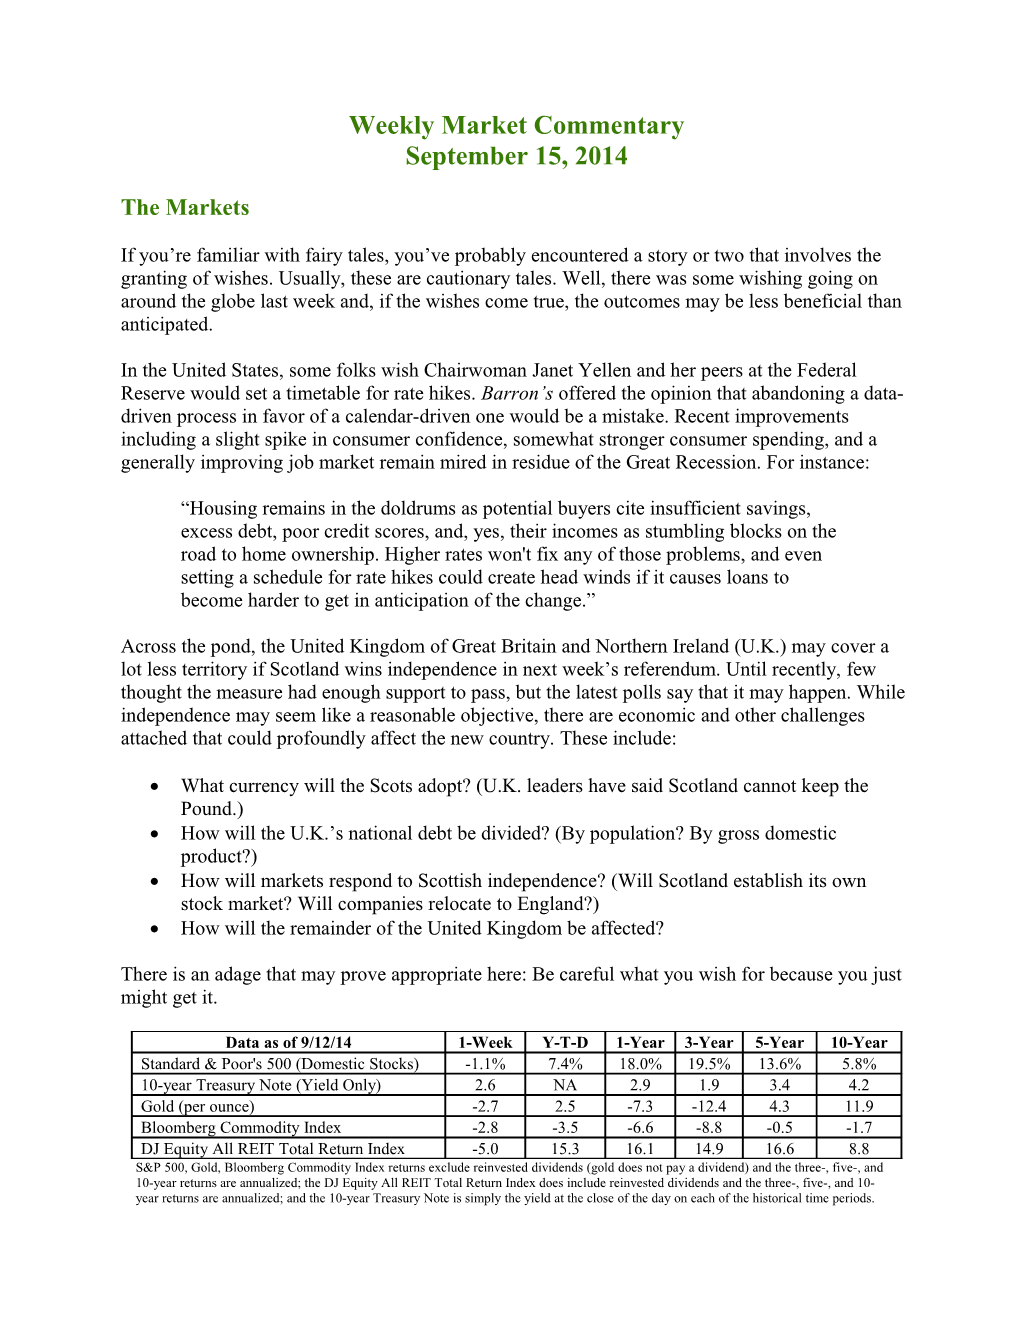 Weekly Commentary 09-15-14 PAA